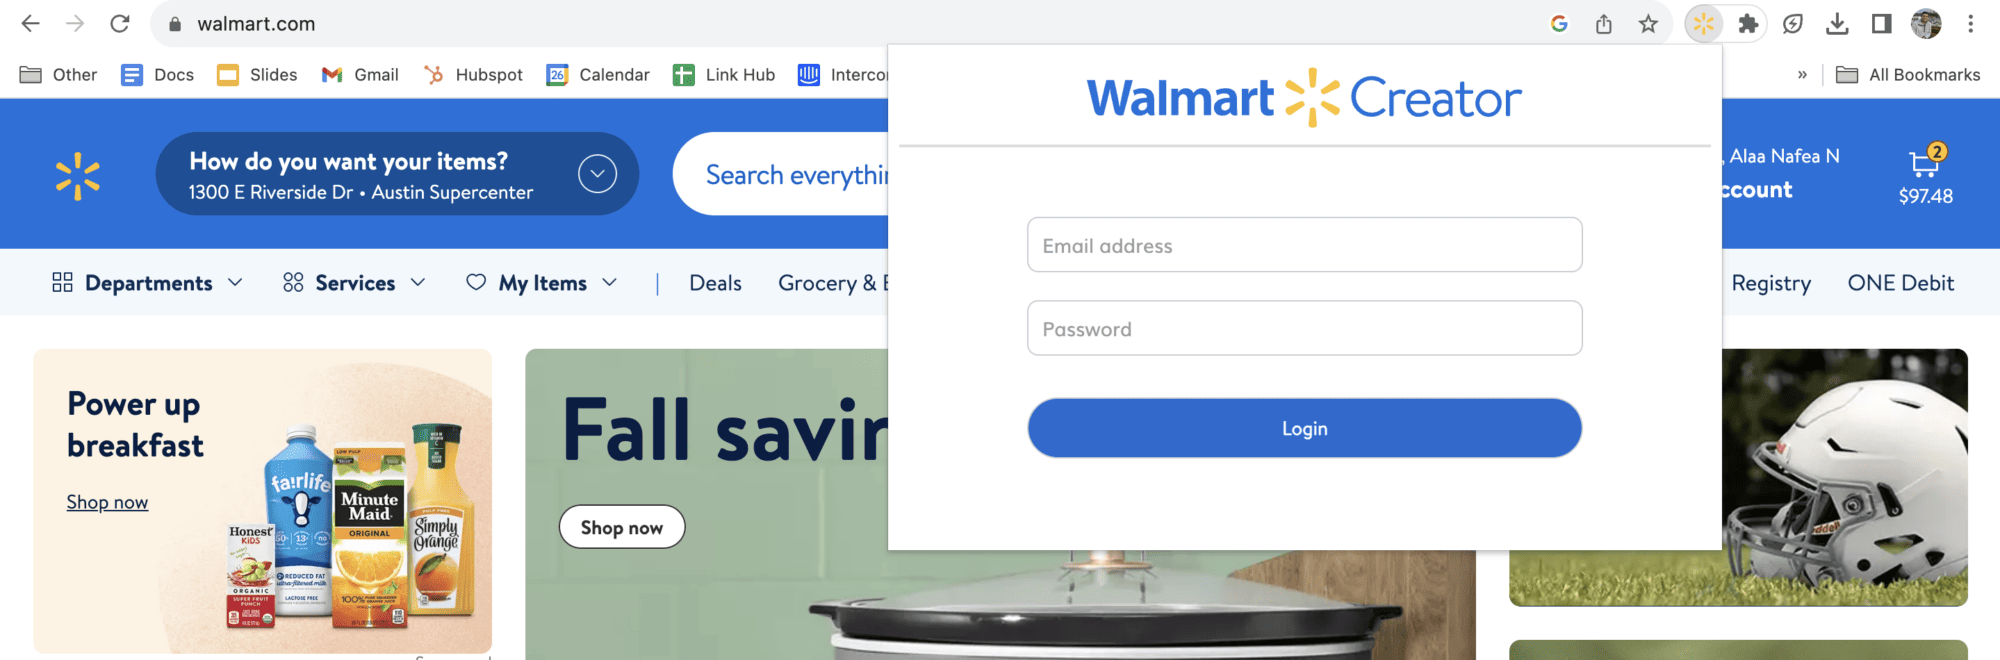 Walmart Creator browser extension for product picking 